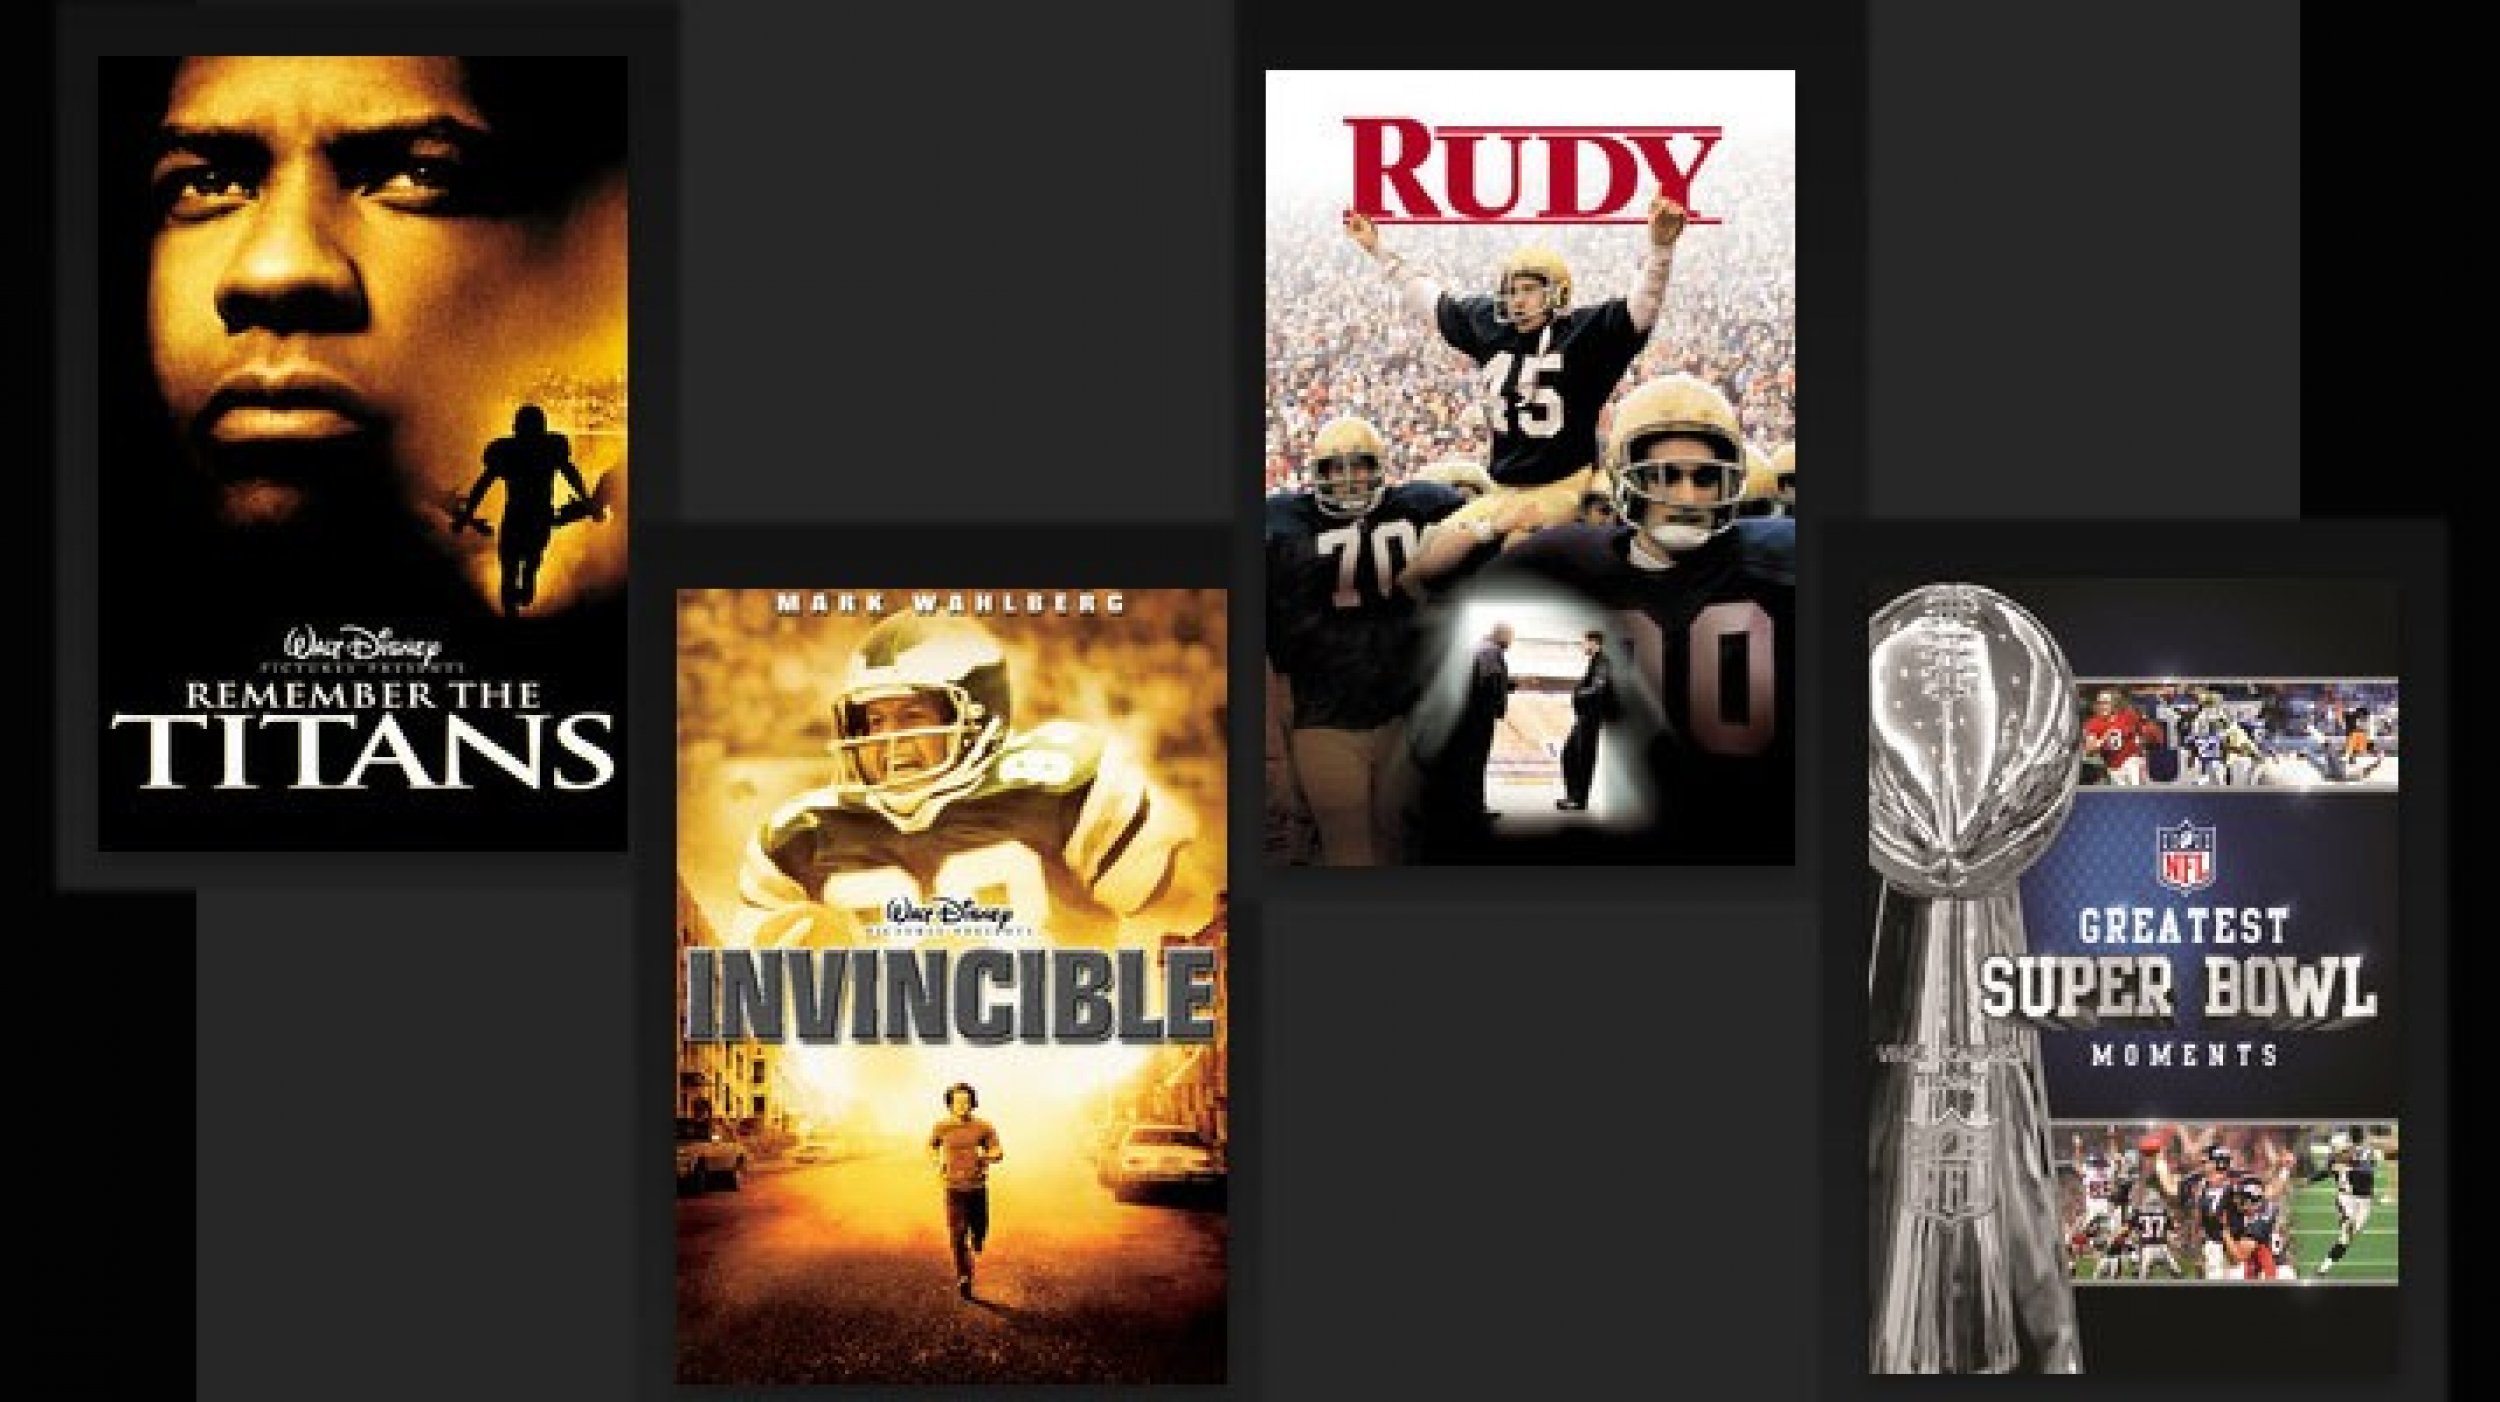 from left to right Remember the Titans, Invincible, Rudy, and NFL Greatest Super Bowl Moments